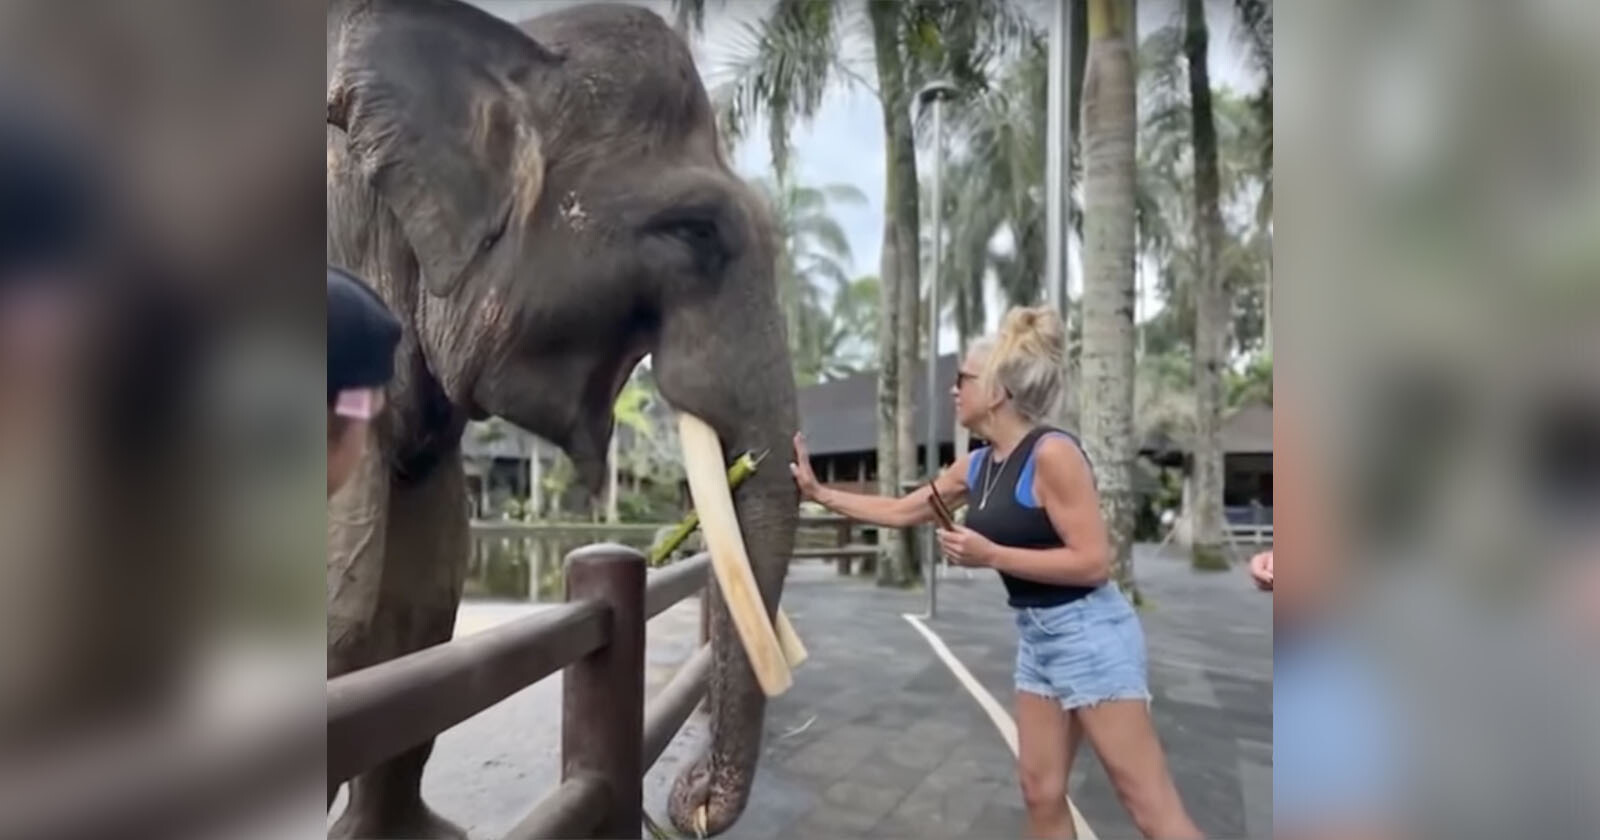 Womans Arm is Severely Broken by Elephant While Posing for a Photo